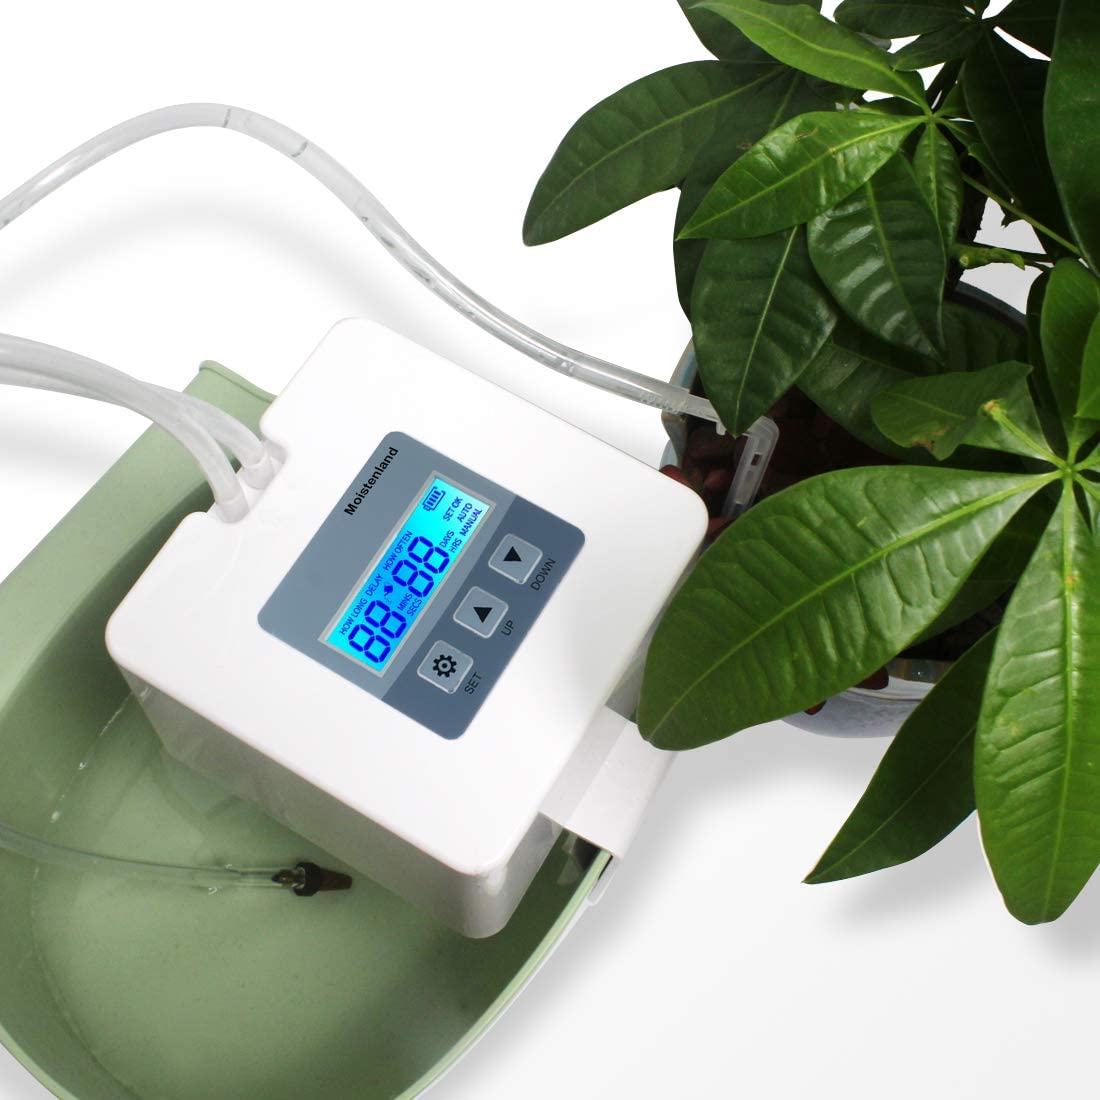 5X Automatic Self-Watering Plant Water Drip Irrigation Device Tool E7P8 